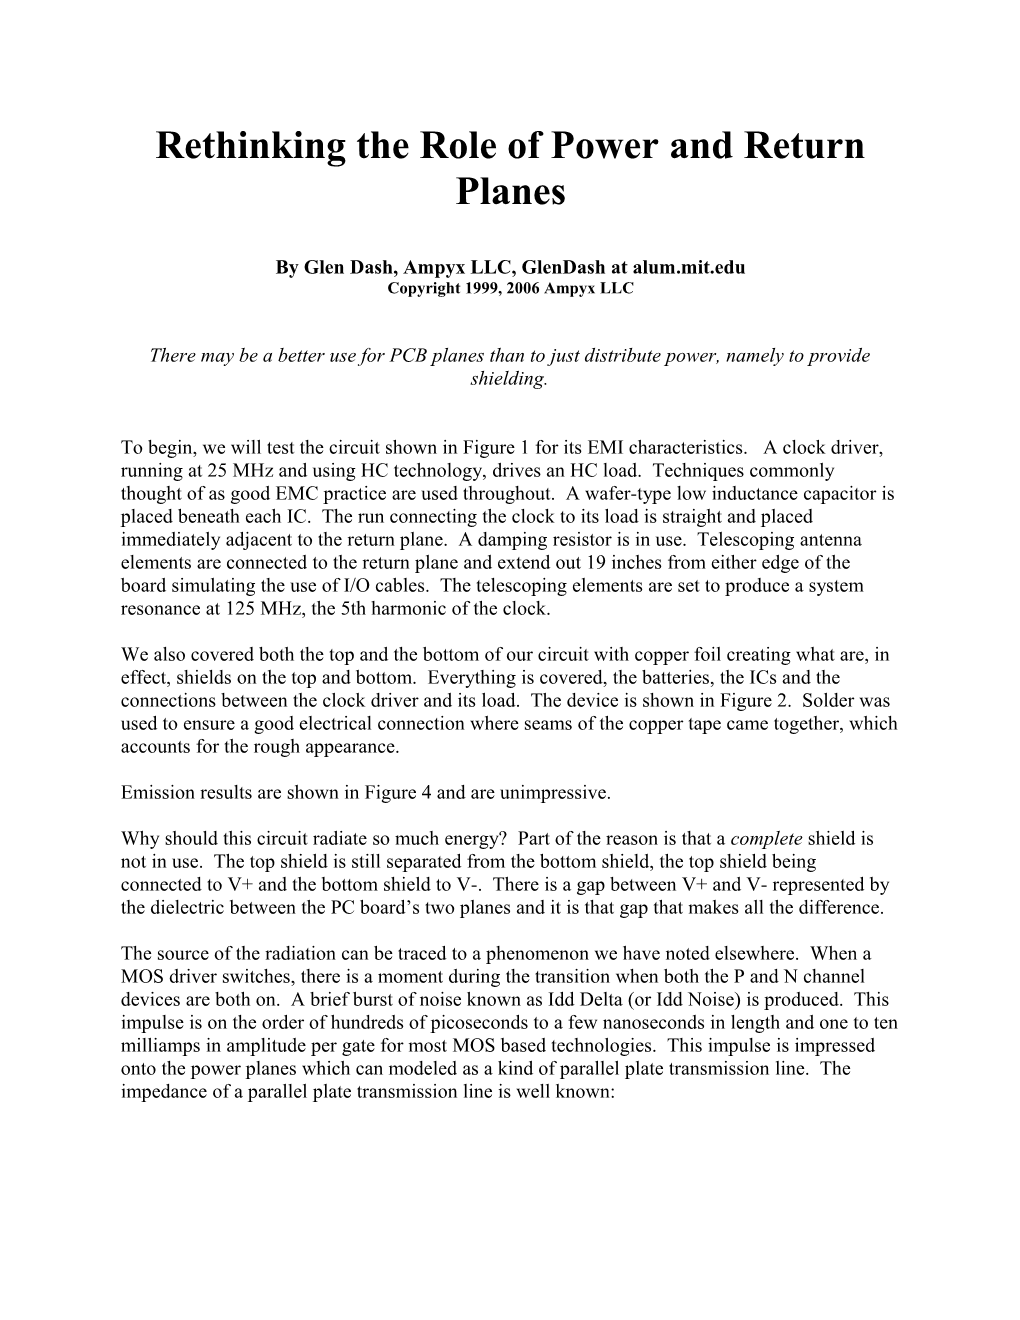 Designing for Compliance 1999 - Part 2: Rethinking the Role of Power and Return Planes